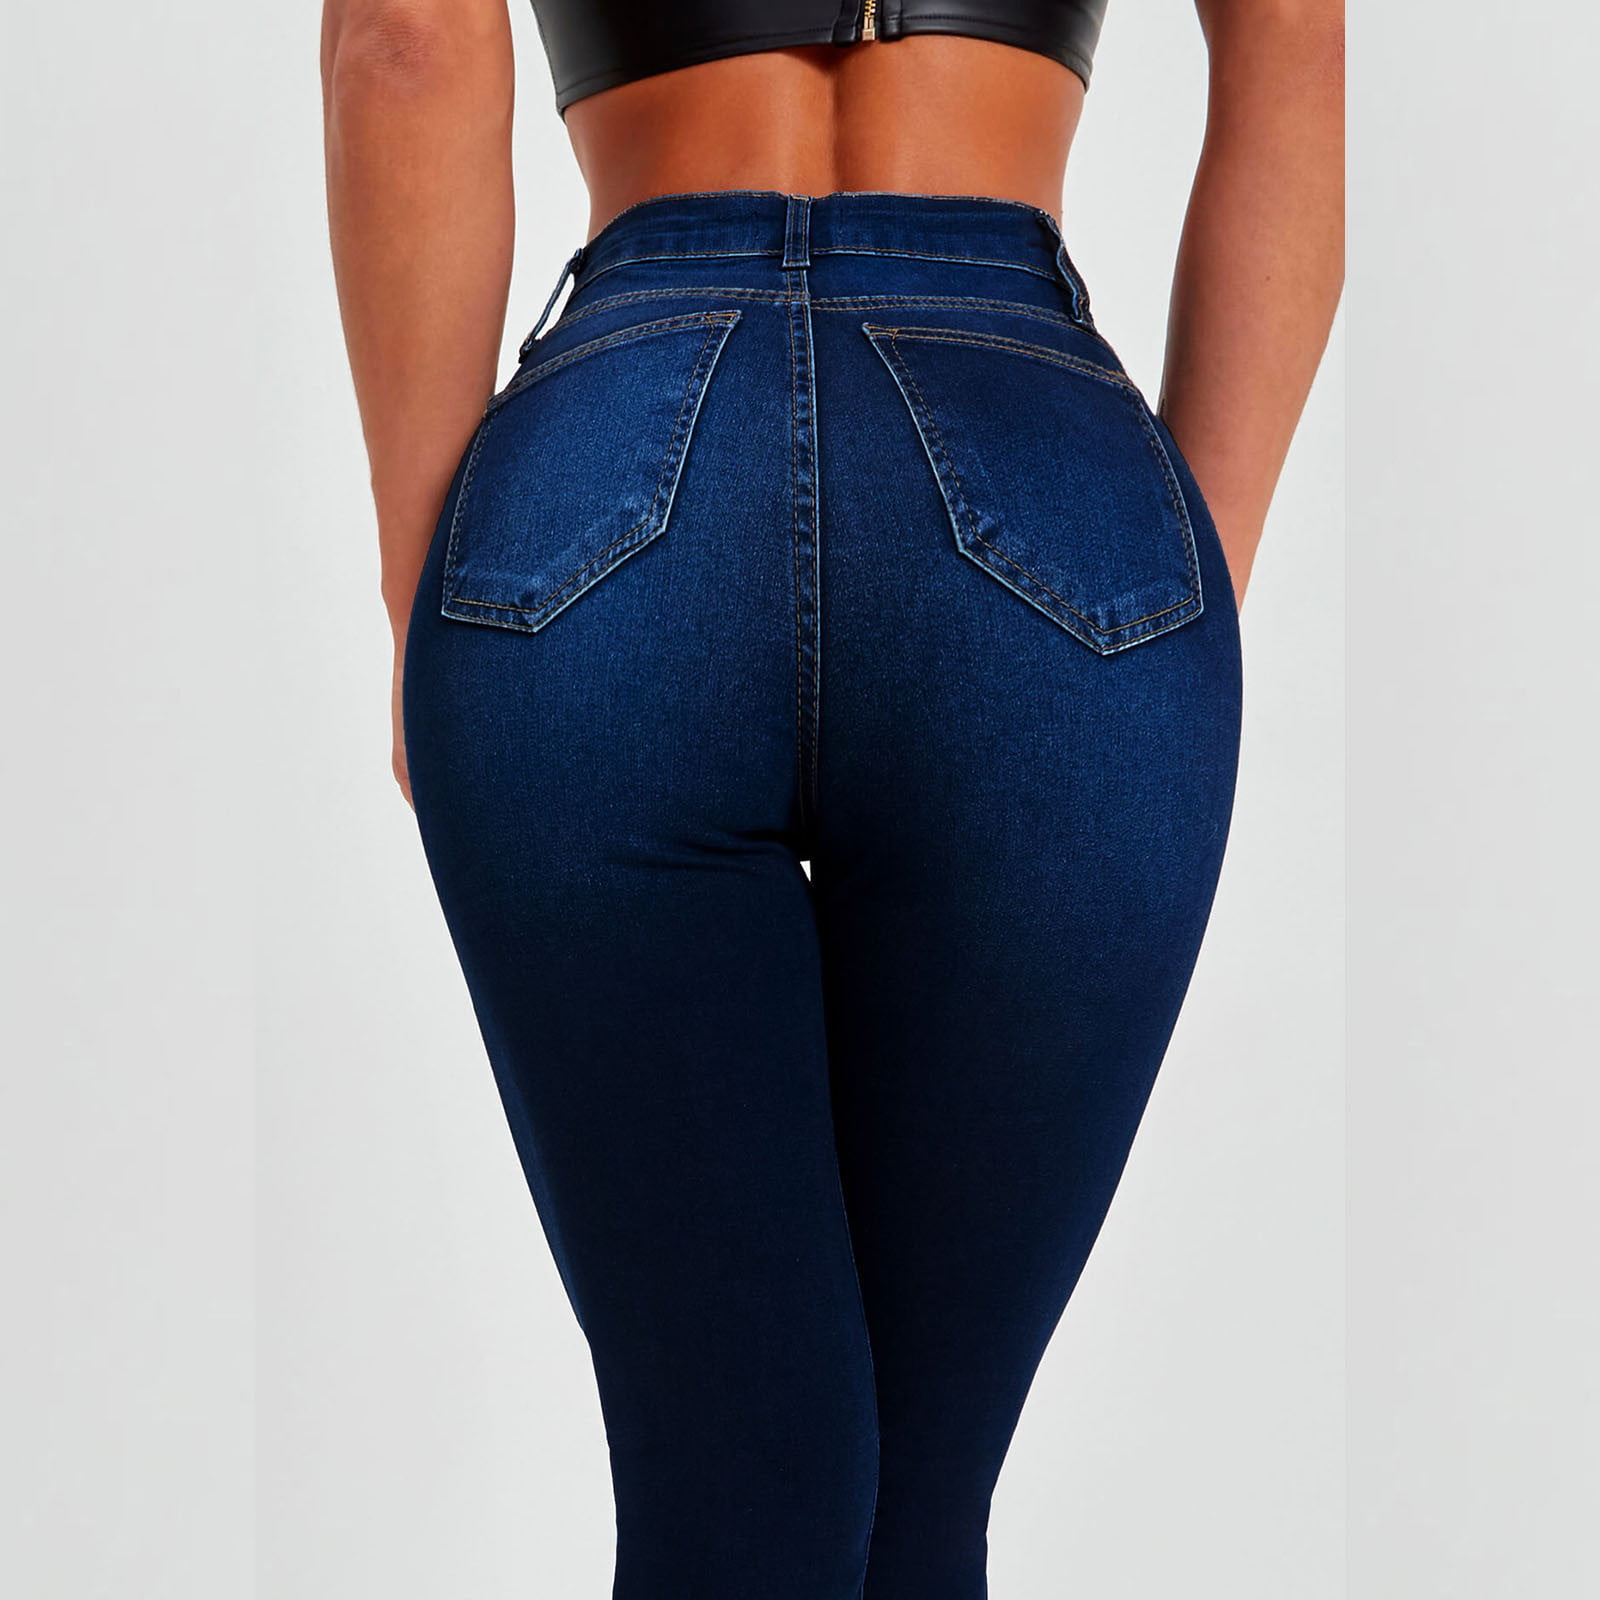 Women's Classic High Waisted Skinny Stretch Butt Lifting Jeans